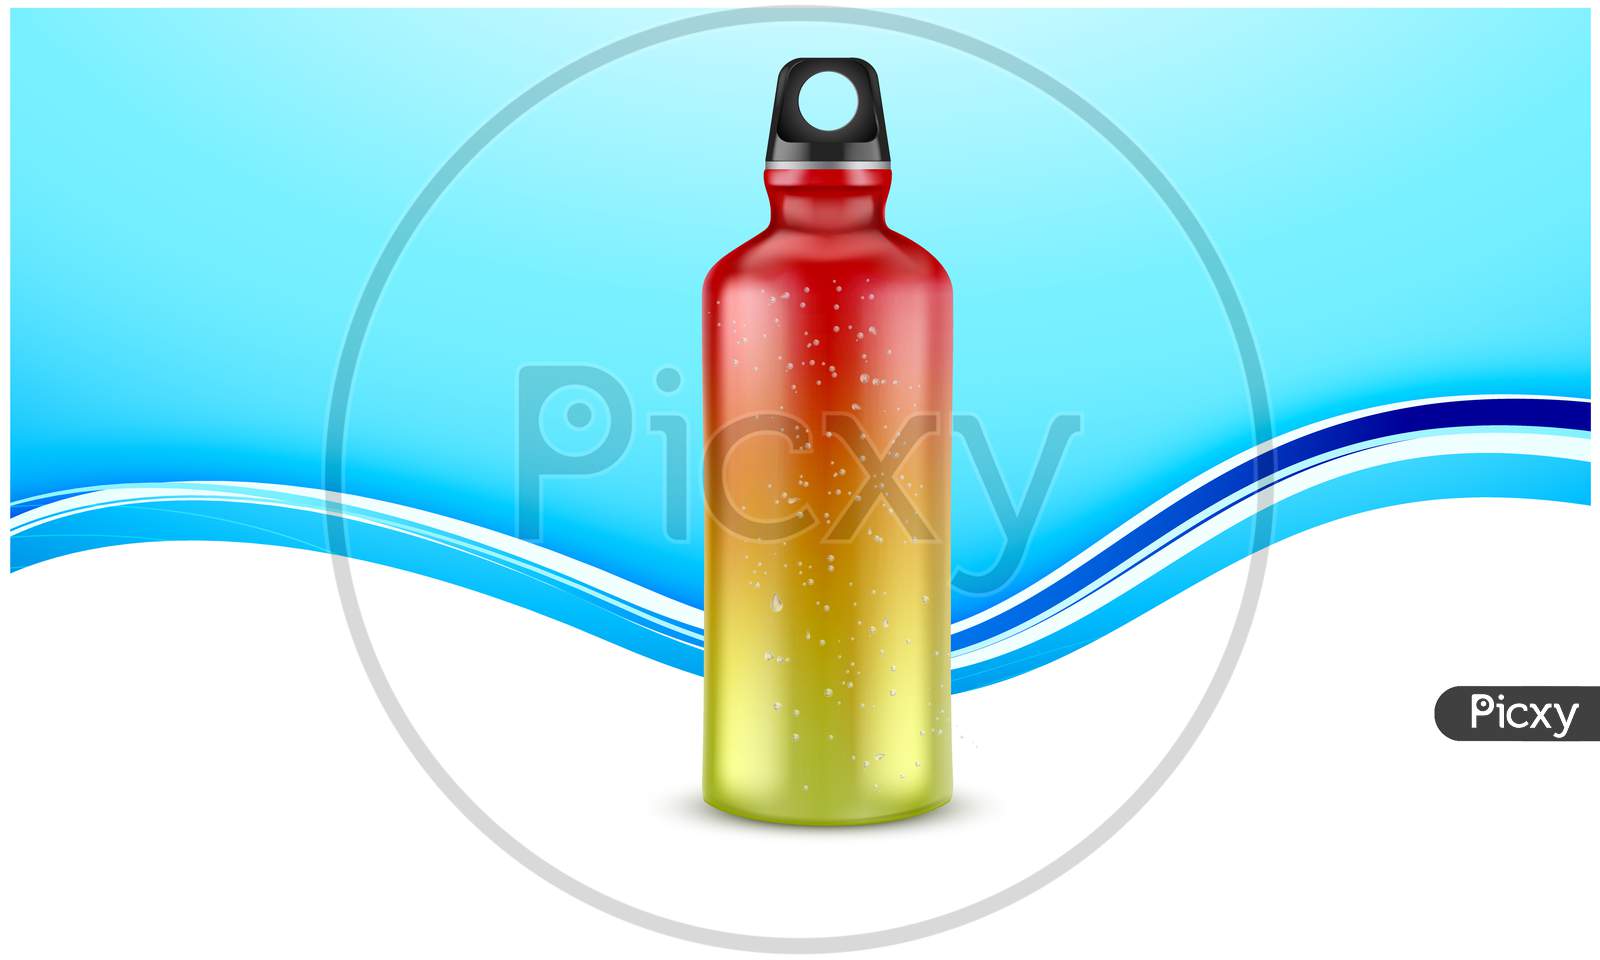 Mock Up Illustration Of Sports Water Bottle On Abstract Background